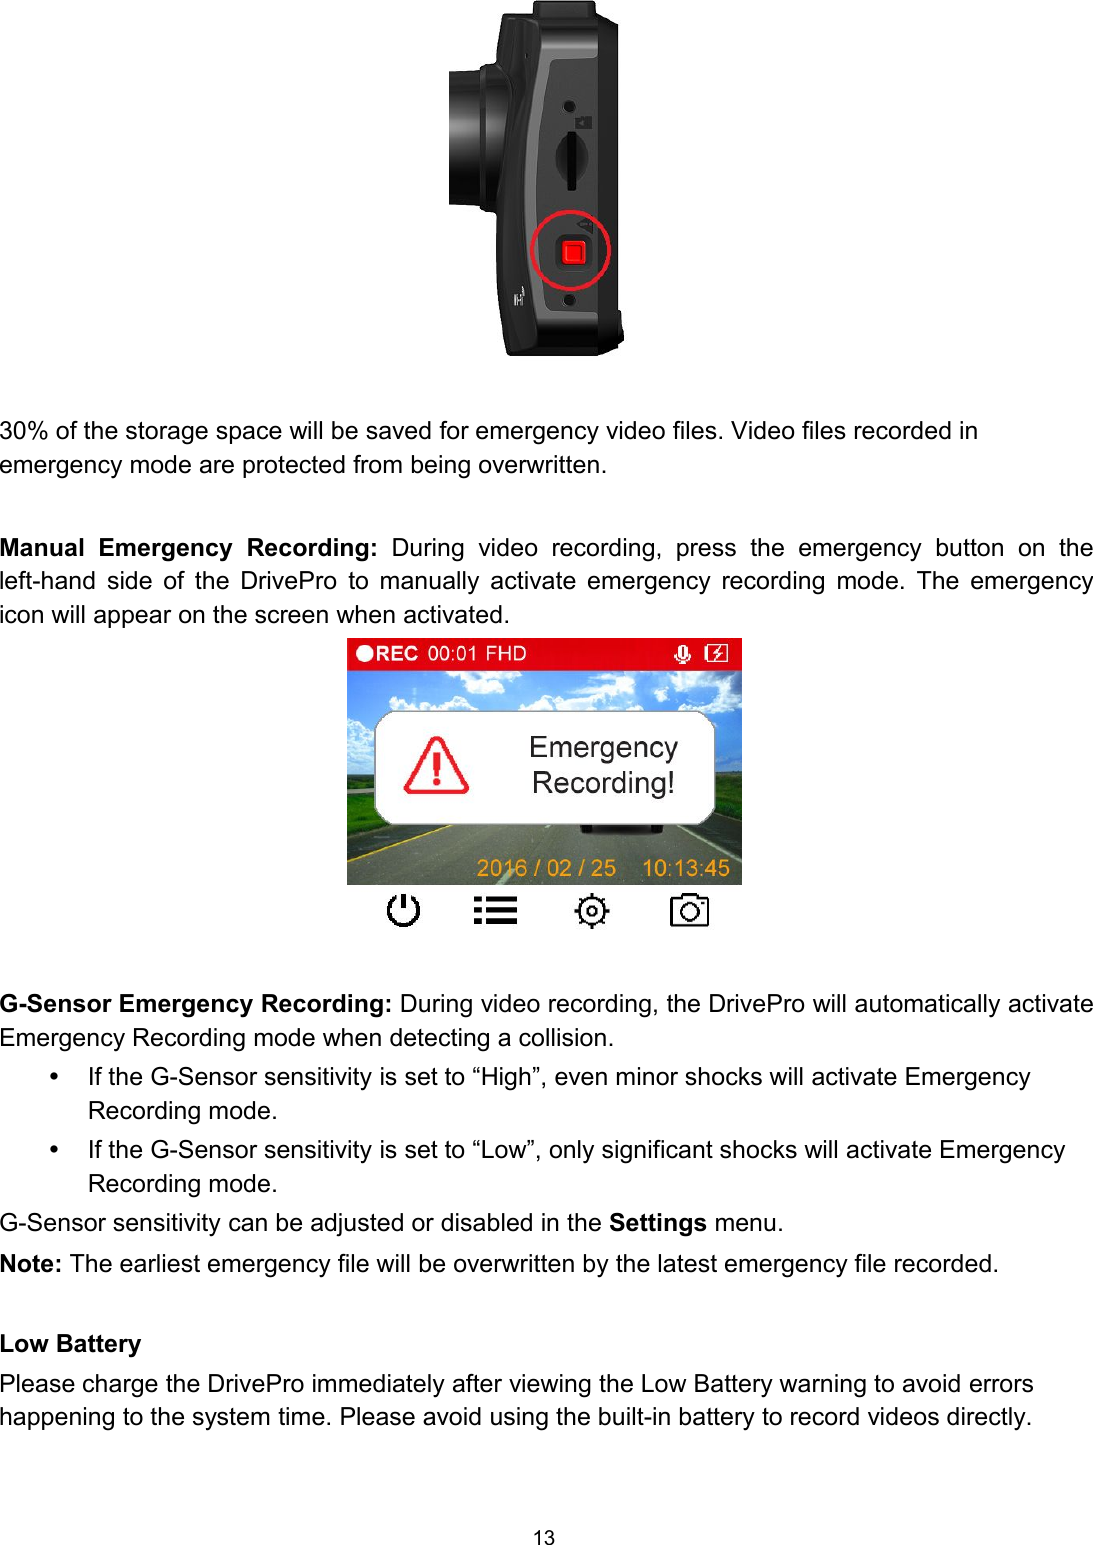 1330% of the storage space will be saved for emergency video files. Video files recorded inemergency mode are protected from being overwritten.Manual Emergency Recording: During video recording, press the emergency button on theleft-hand side of the DrivePro to manually activate emergency recording mode. The emergencyicon will appear on the screen when activated.G-Sensor Emergency Recording: During video recording, the DrivePro will automatically activateEmergency Recording mode when detecting a collision.If the G-Sensor sensitivity is set to “High”, even minor shocks will activate EmergencyRecording mode.If the G-Sensor sensitivity is set to “Low”, only significant shocks will activate EmergencyRecording mode.G-Sensor sensitivity can be adjusted or disabled in the Settings menu.Note: The earliest emergency file will be overwritten by the latest emergency file recorded.Low BatteryPlease charge the DrivePro immediately after viewing the Low Battery warning to avoid errorshappening to the system time. Please avoid using the built-in battery to record videos directly.